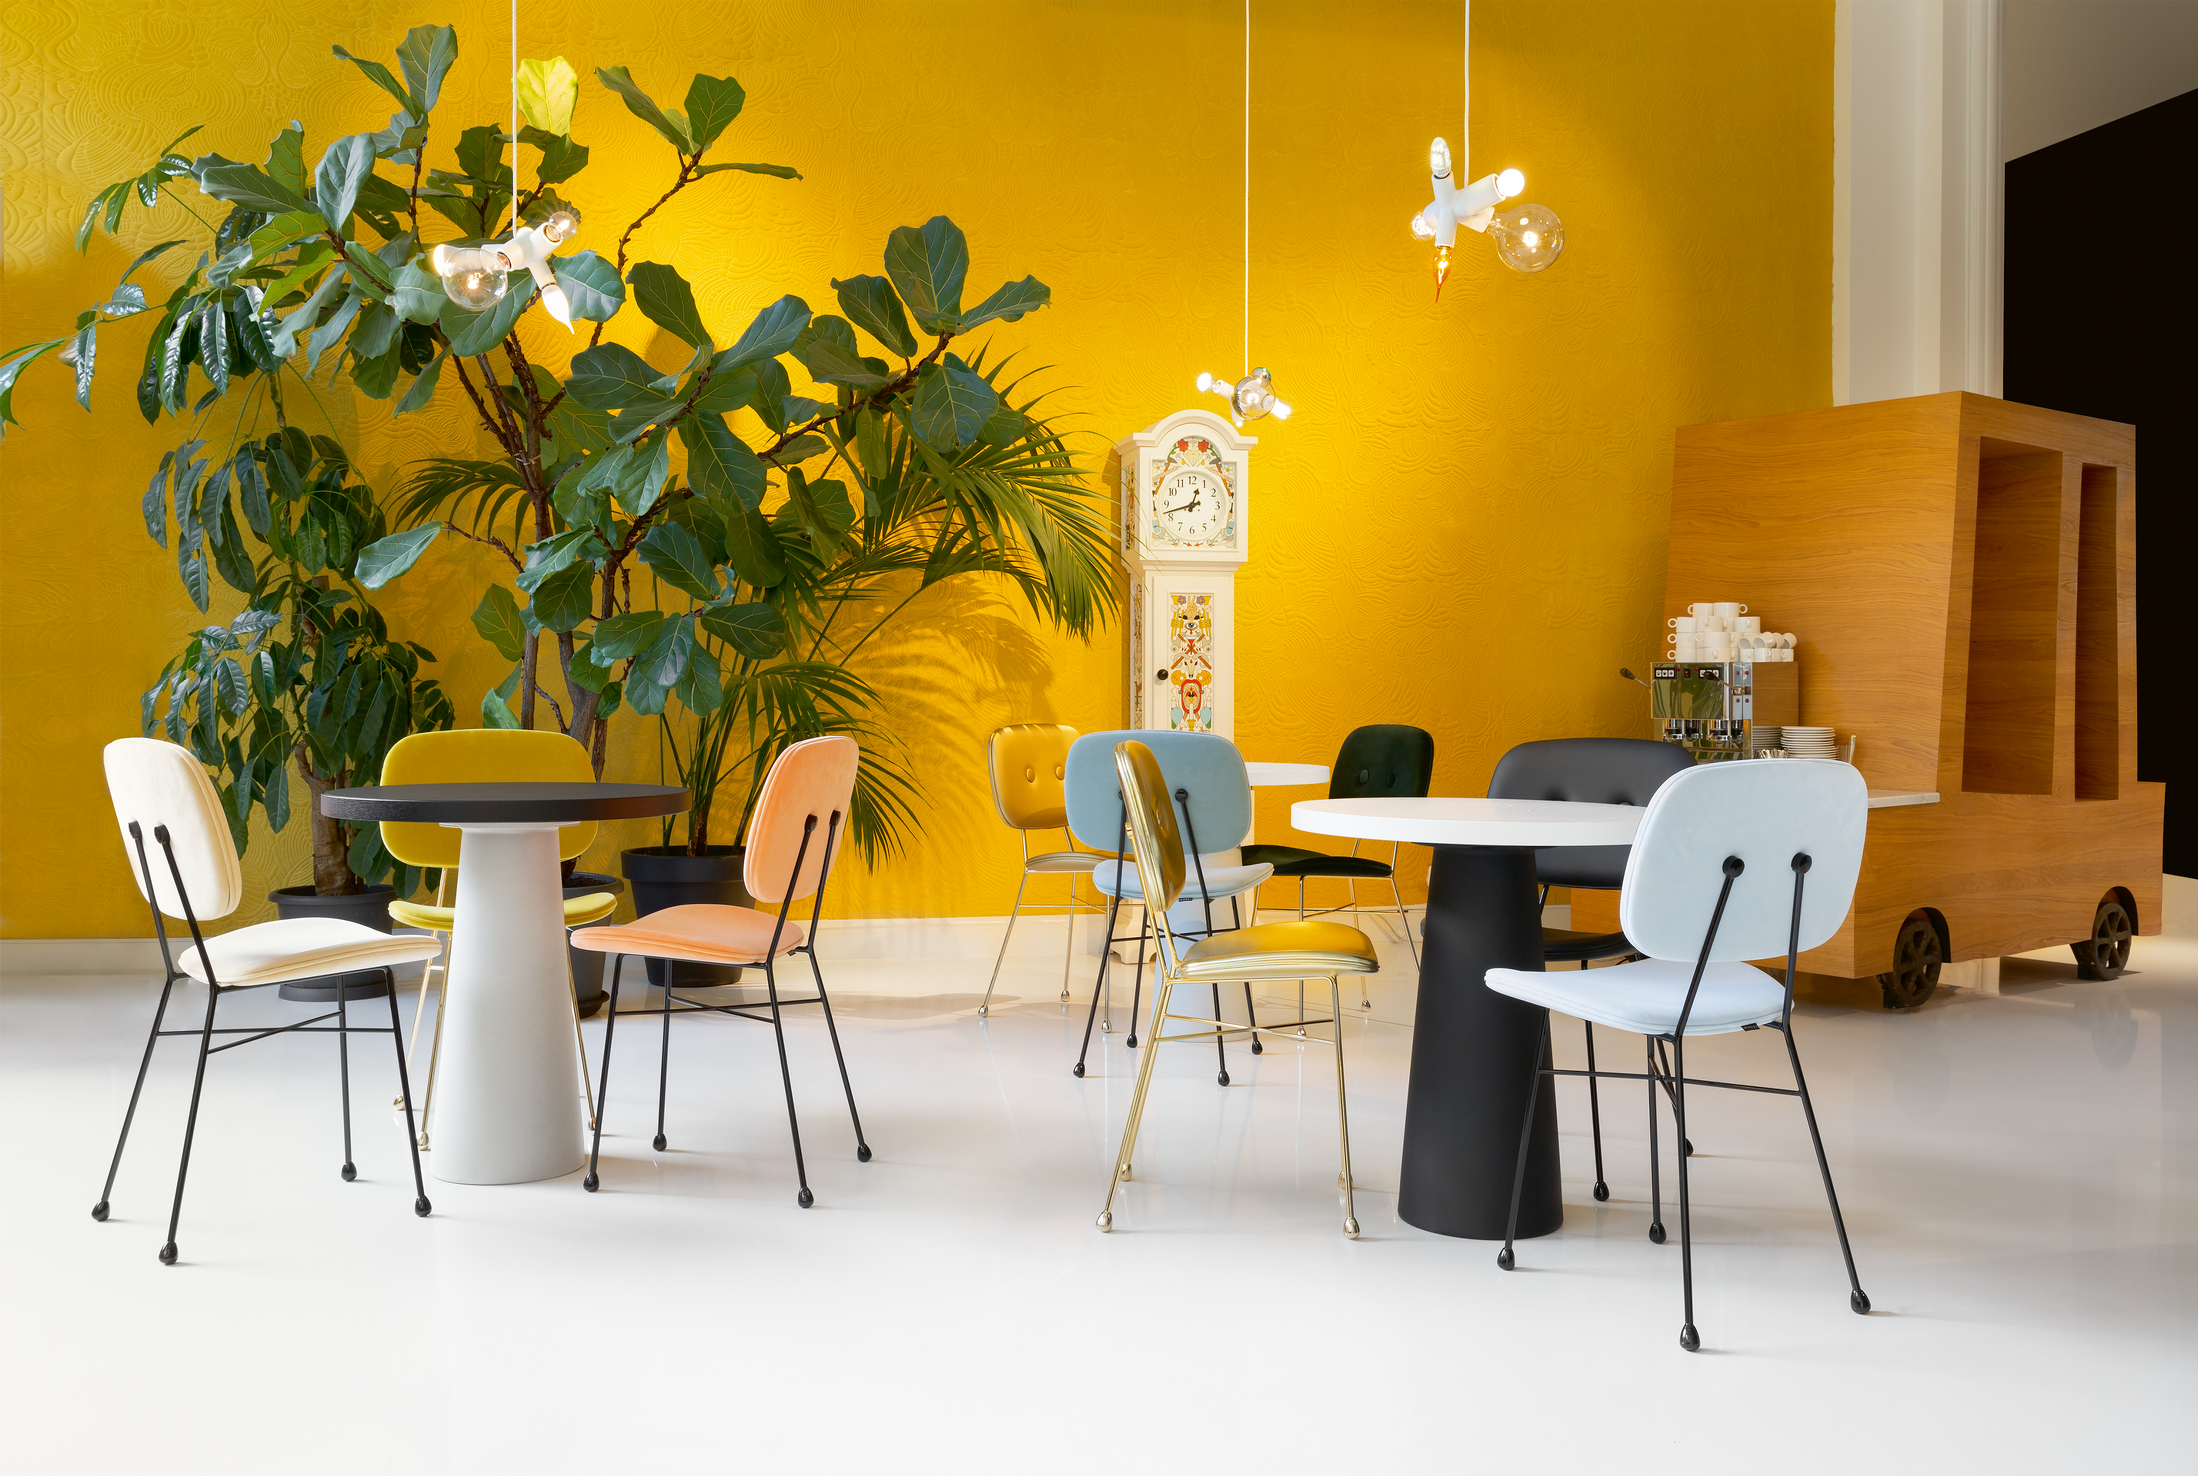 moooi container tables classic cafe setting with cluster lamp and the golden chairs